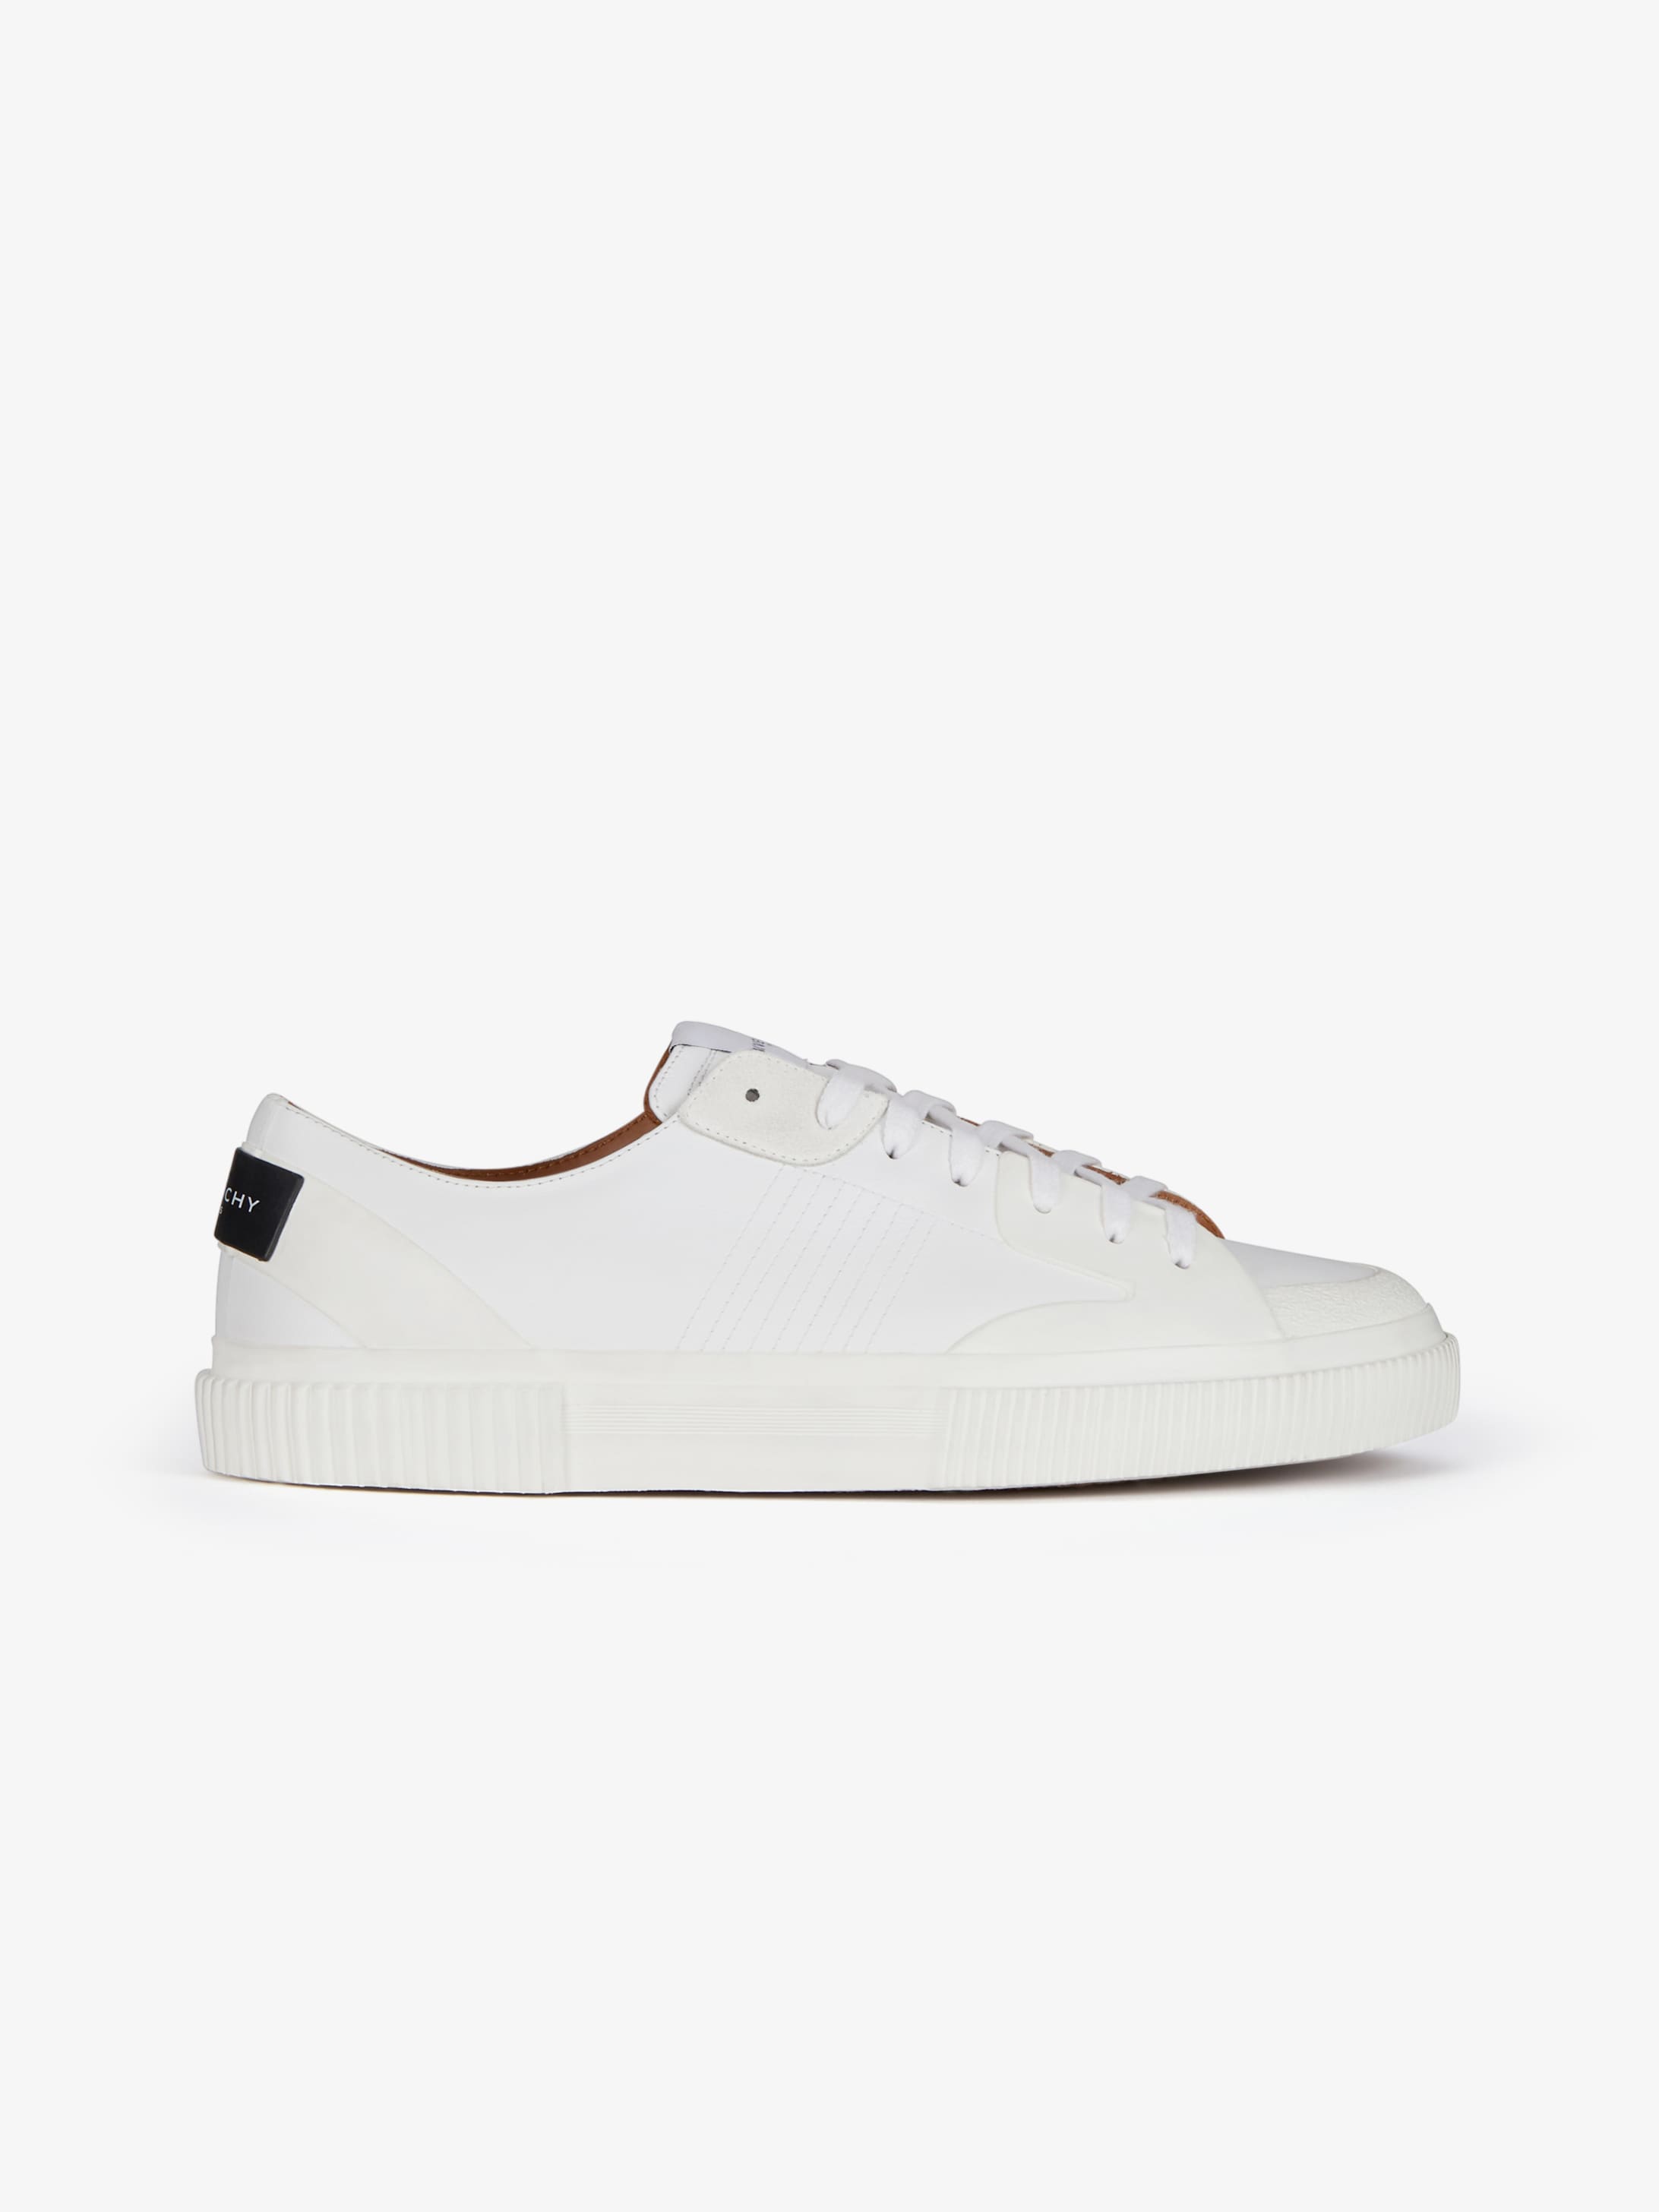 Tennis Light low sneakers in leather 